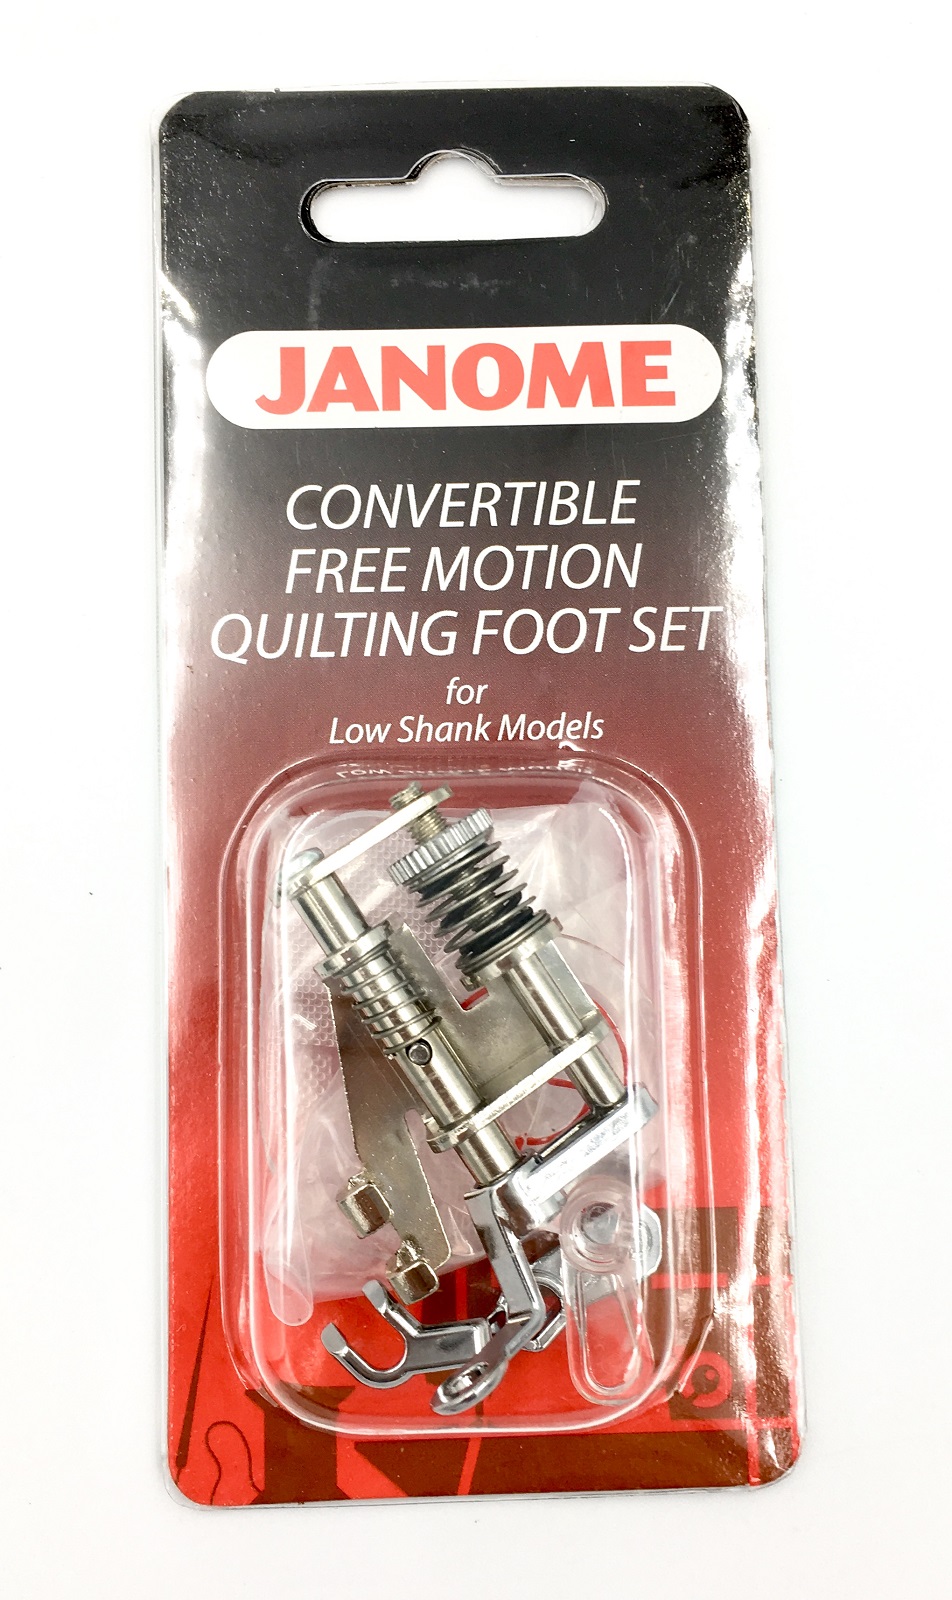 Convertible Free Motion Quilting Foot Set - 202002004